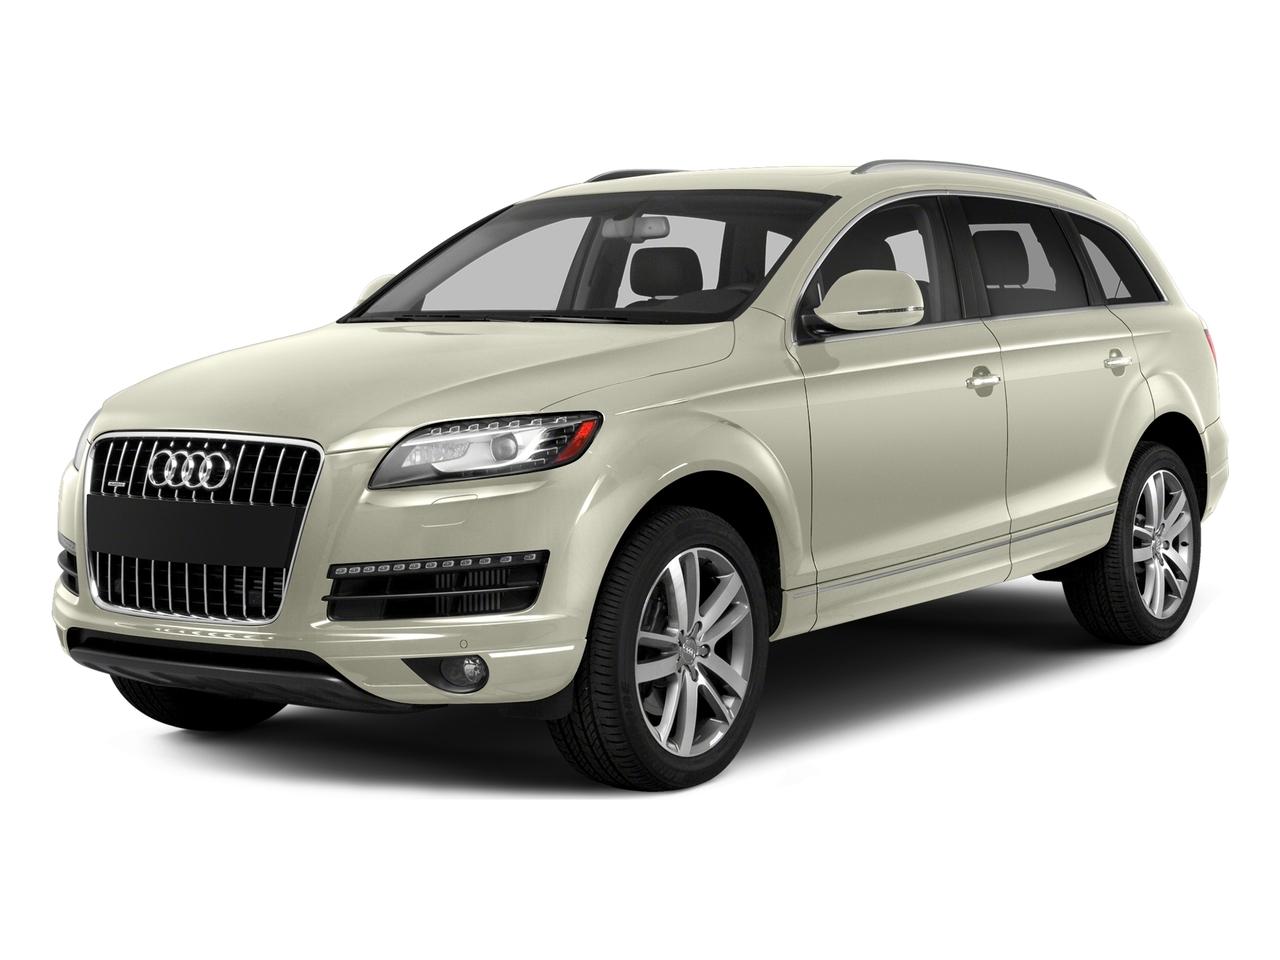 2015 Audi Q7 Vehicle Photo in Willow Grove, PA 19090